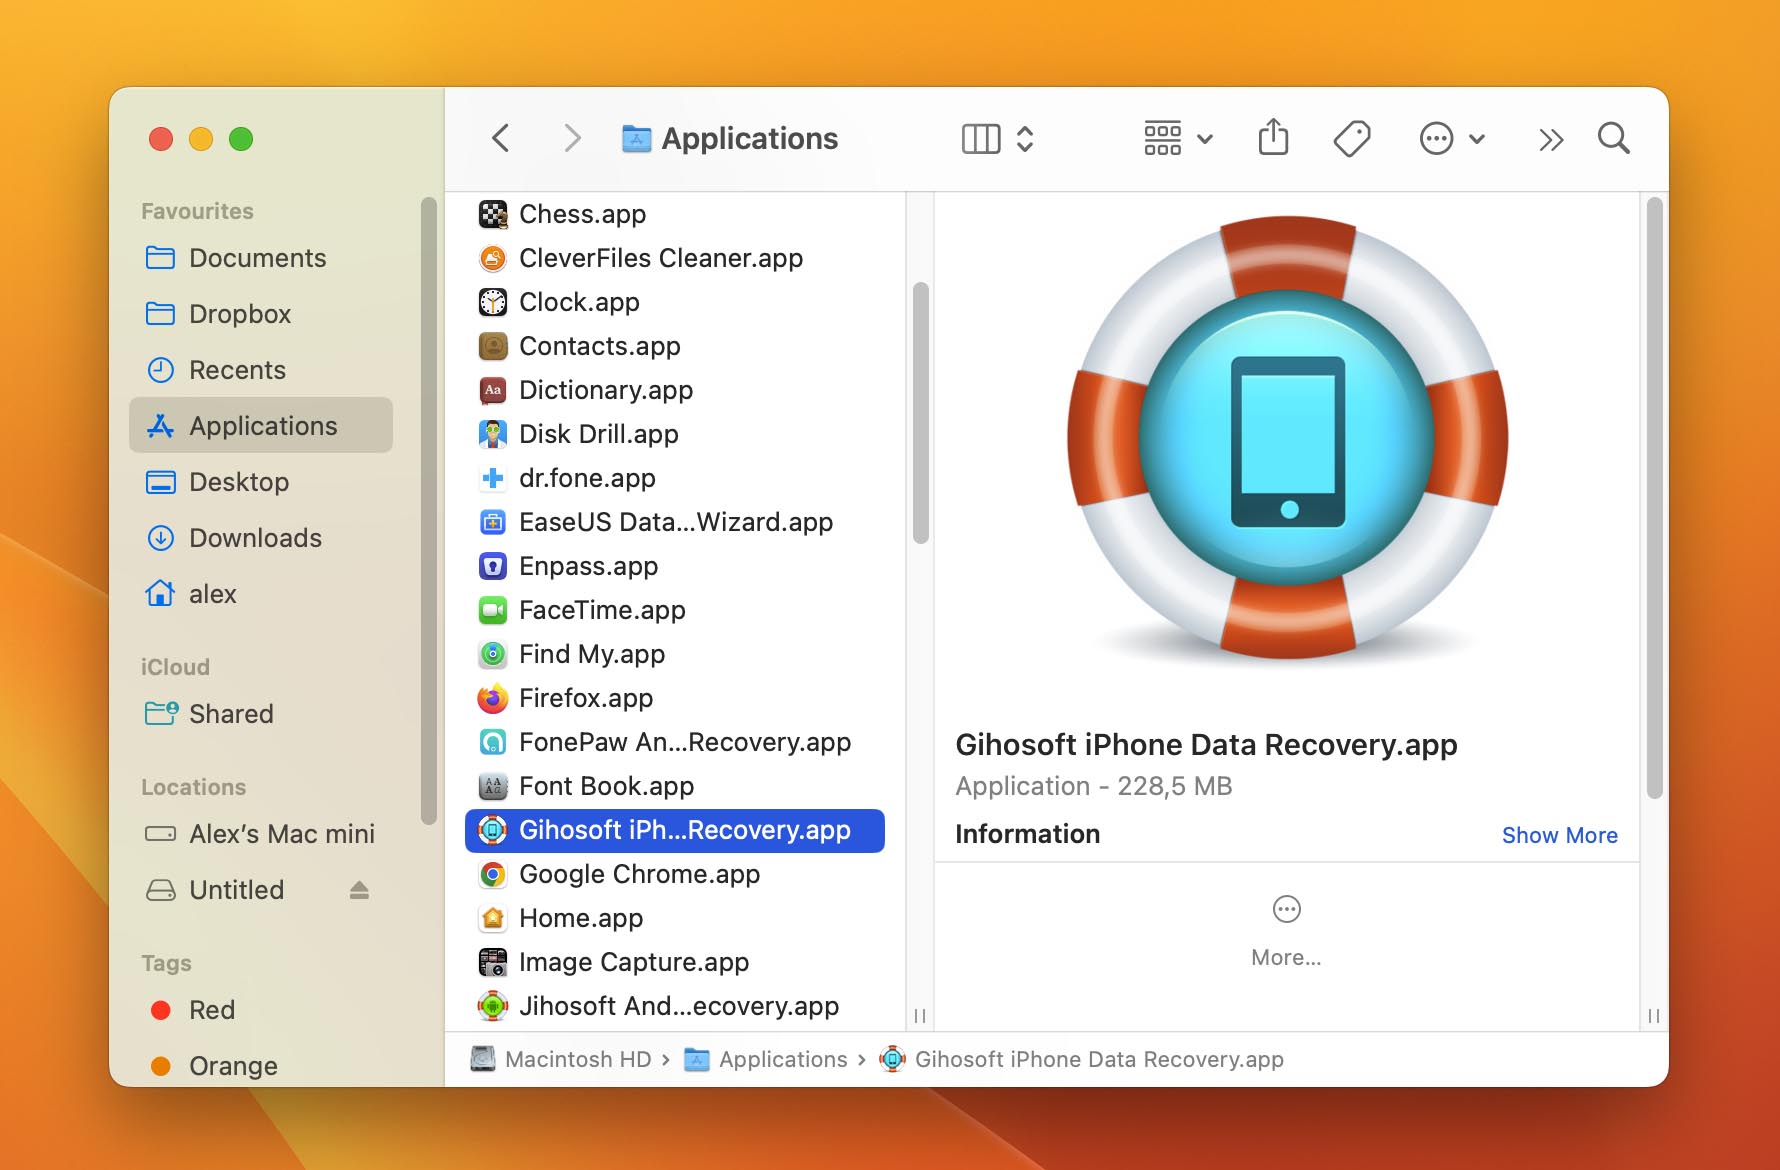 Gihosoft iPhone Data Recovery app in the Finder Applications folder